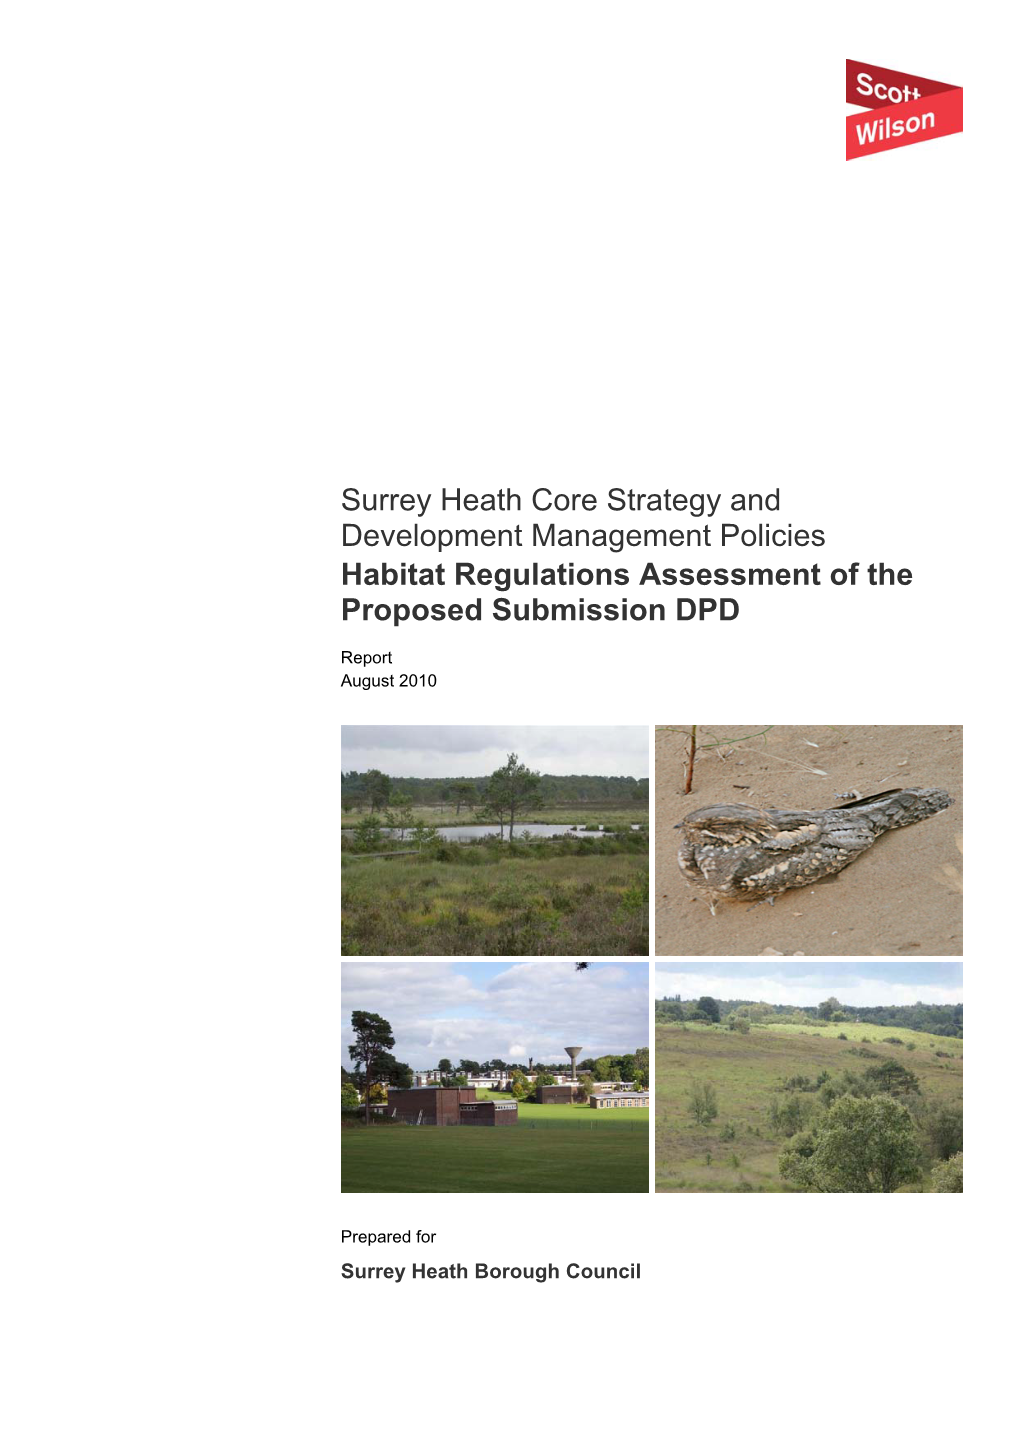 Surrey Heath Core Strategy and Development Management Policies Habitat Regulations Assessment of the Proposed Submission DPD